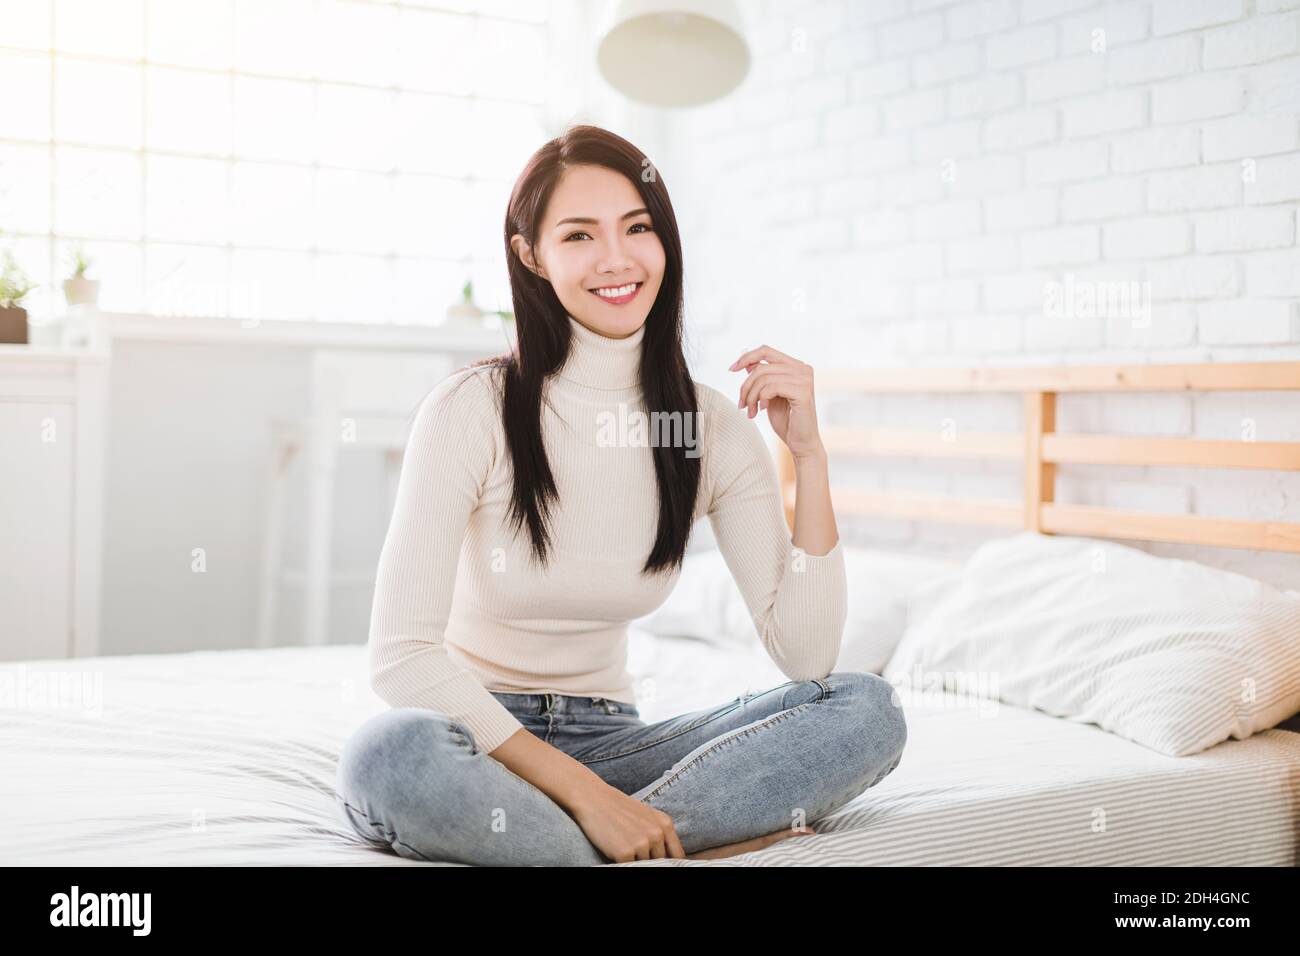 Young beautiful woman smiling and sitting on bed at home Stock Photo